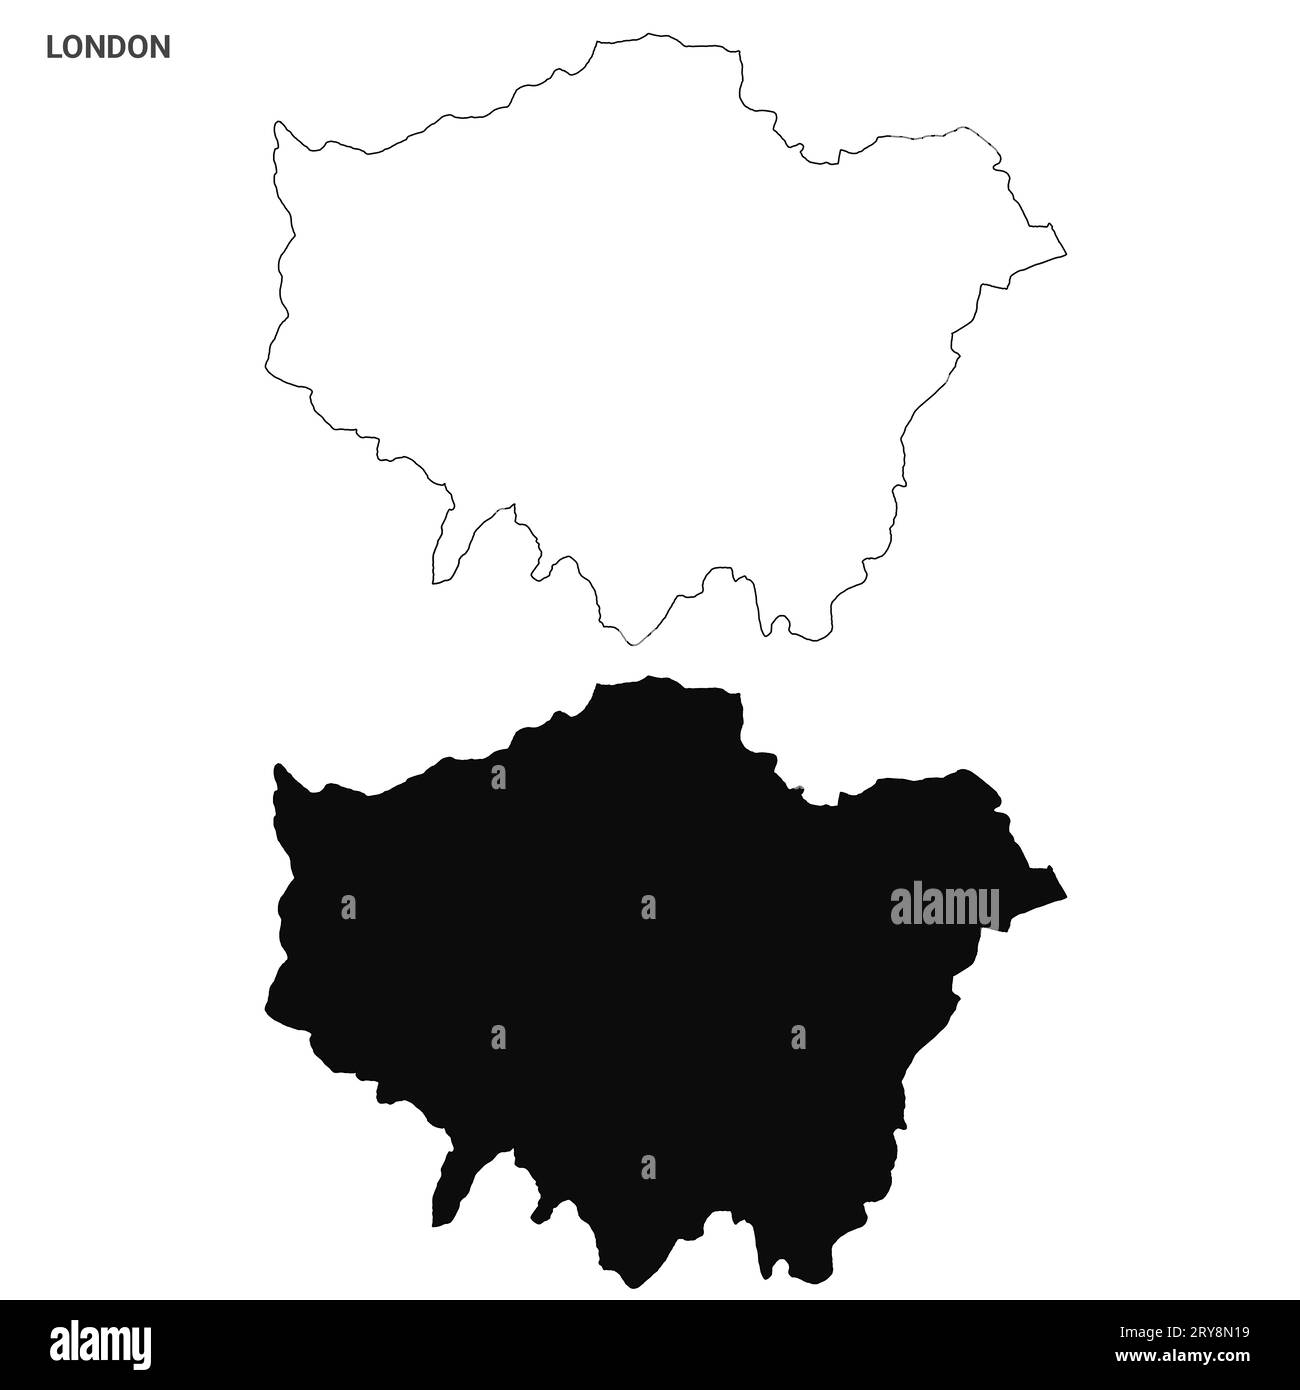 Greater London Administrative Map Set - blank counties or boroughs outline Stock Photo